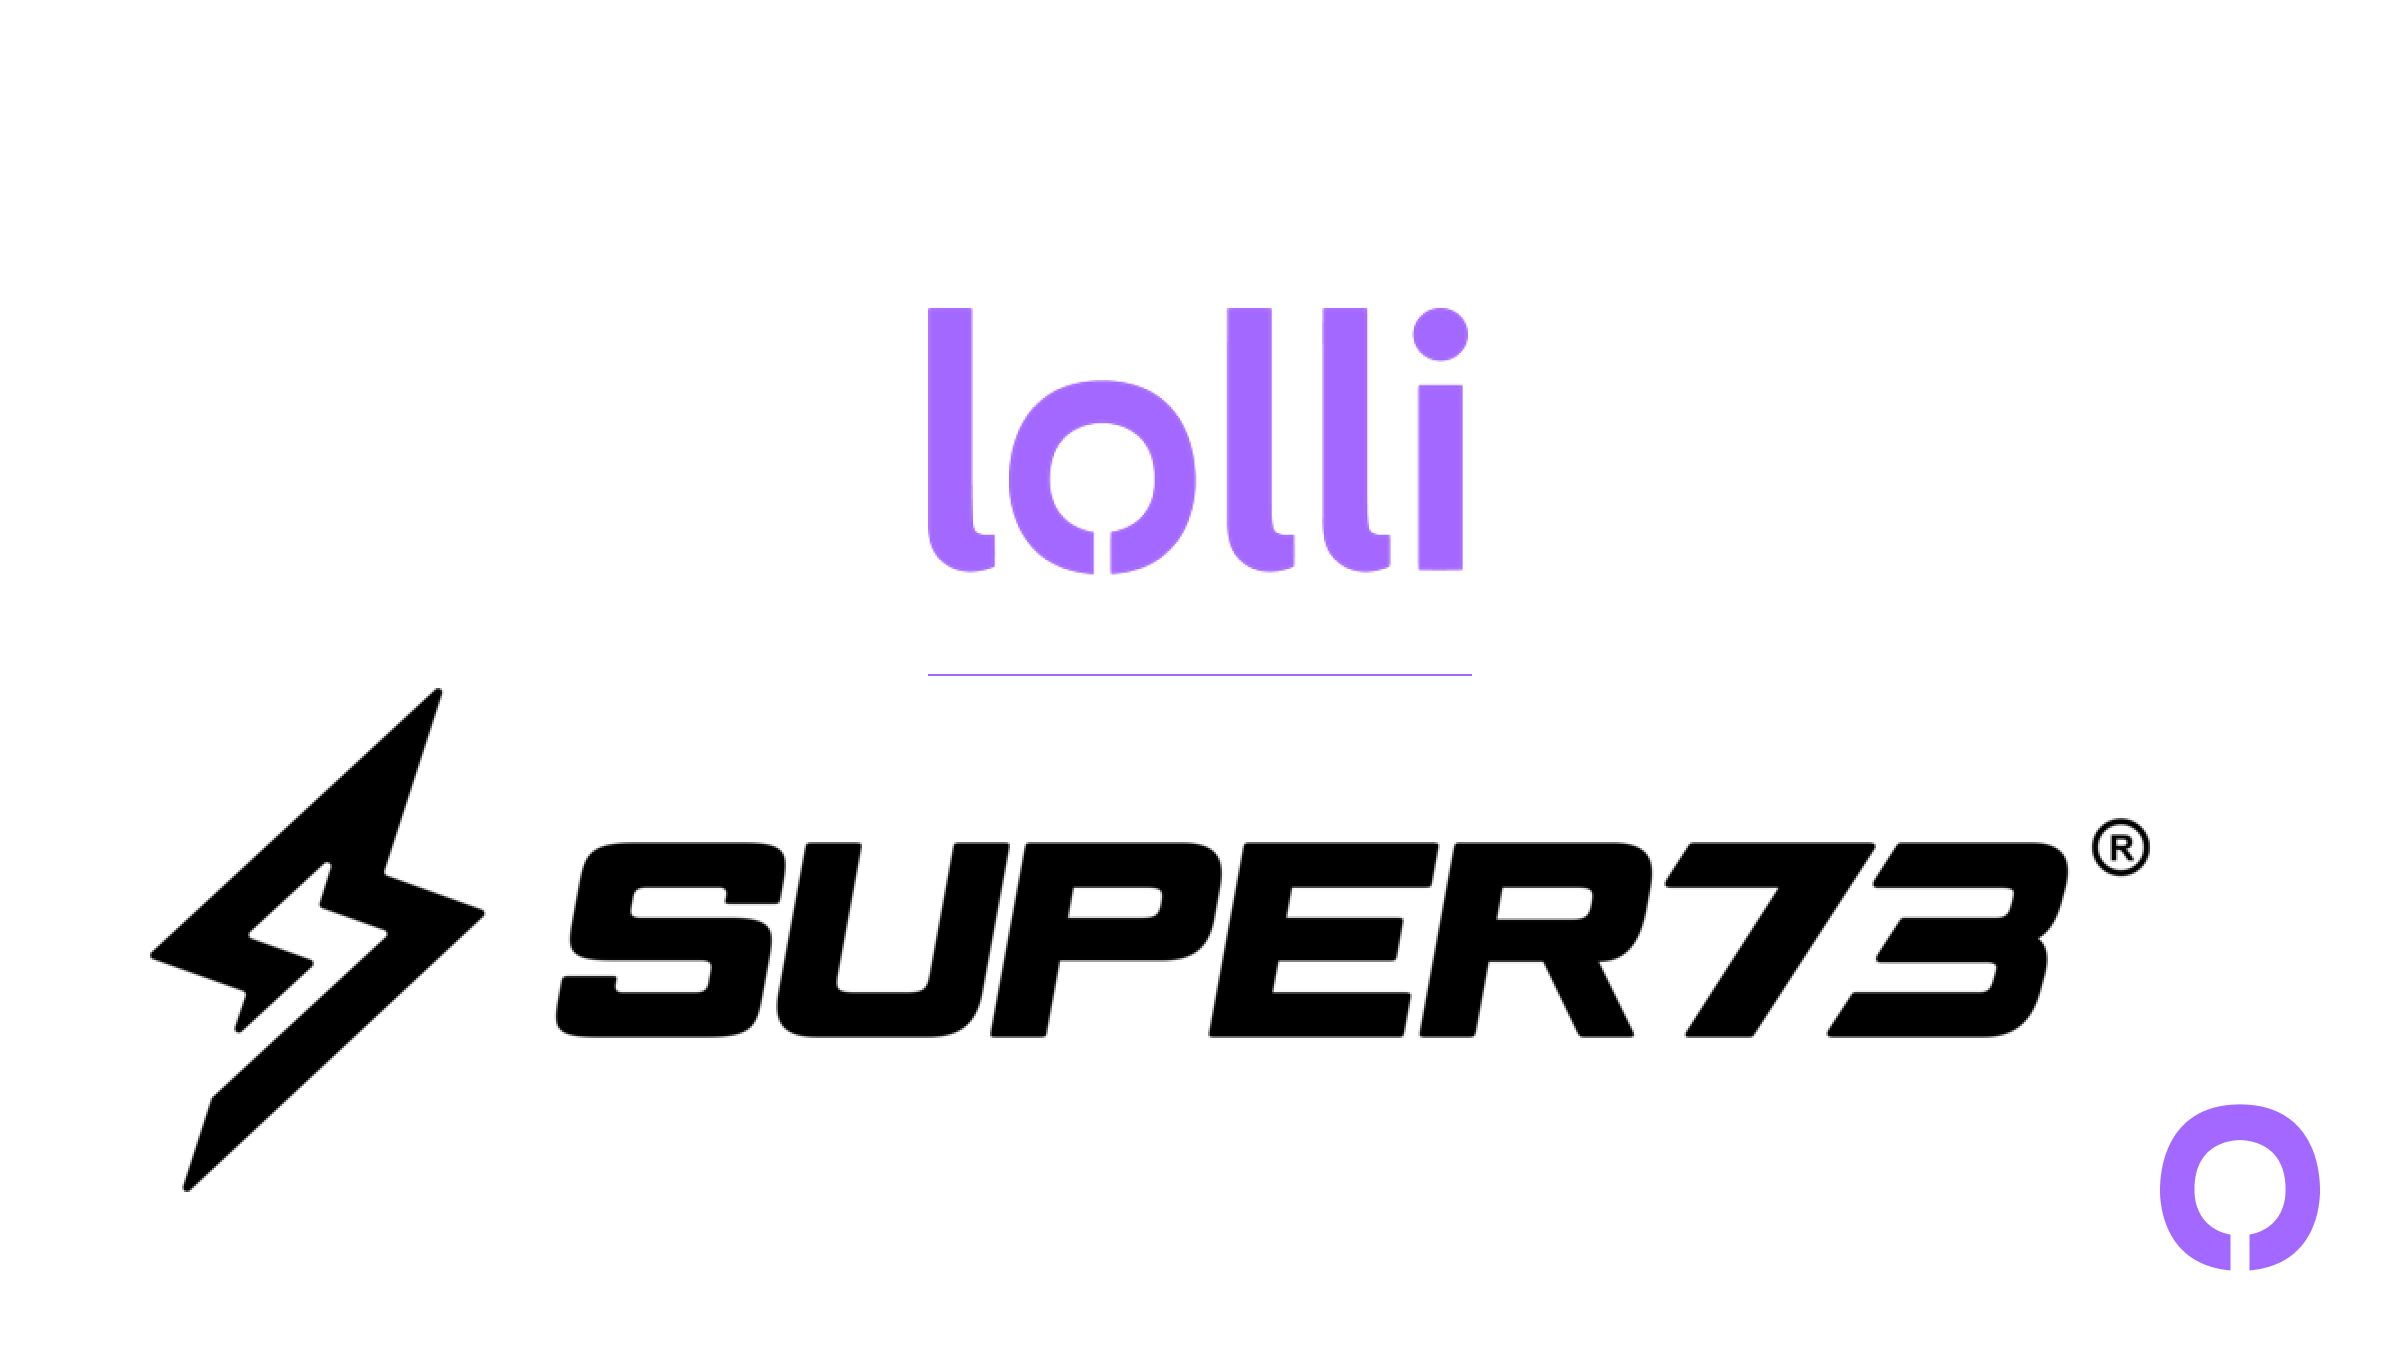 Super73 Is Now on Lolli!